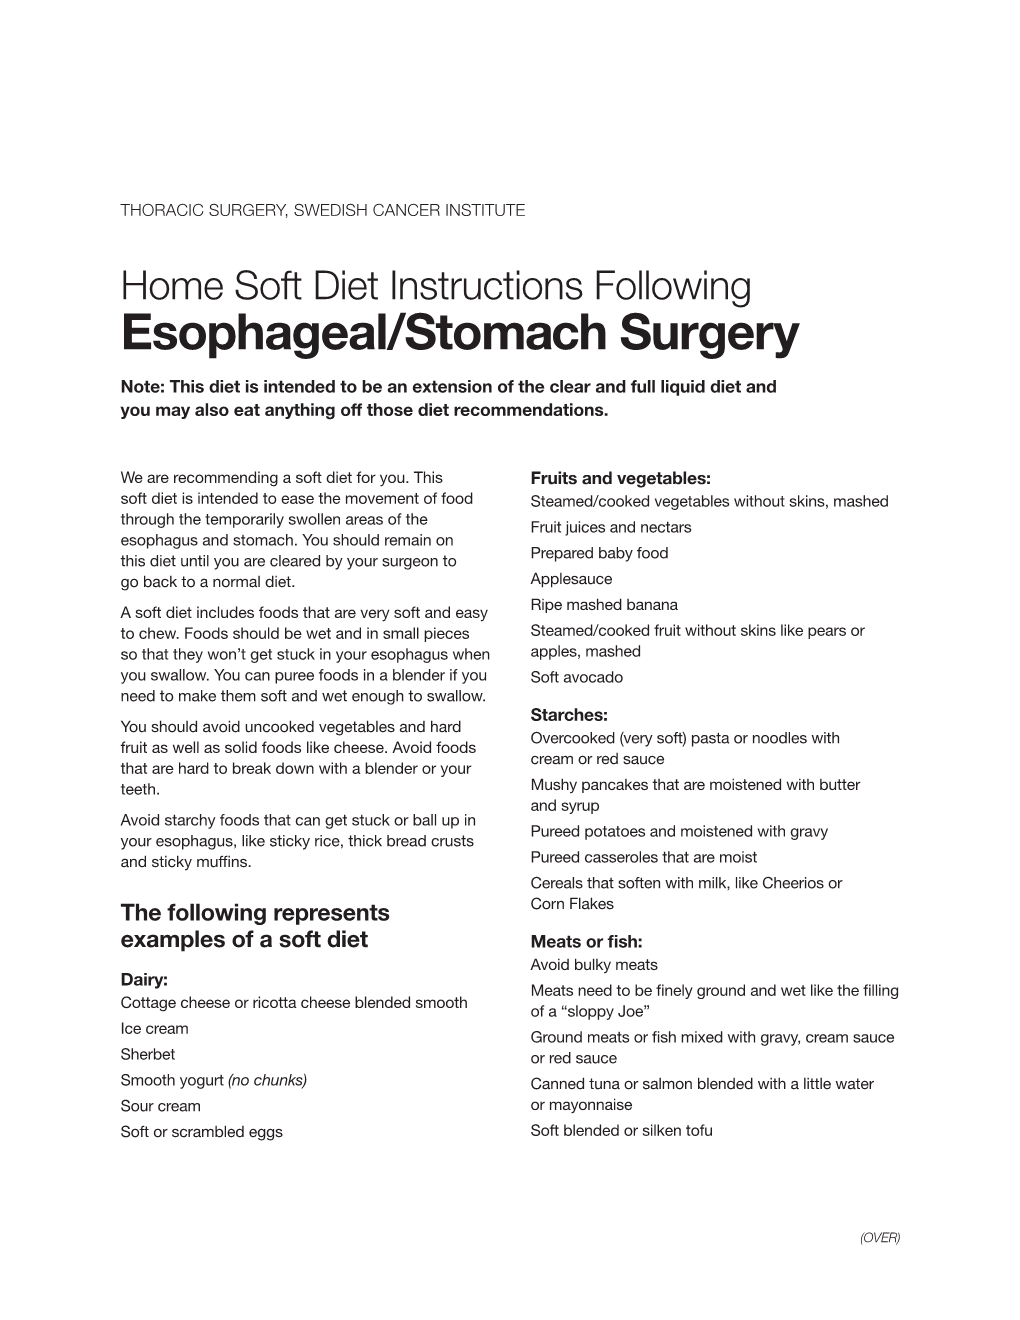 Esophageal/Stomach Surgery